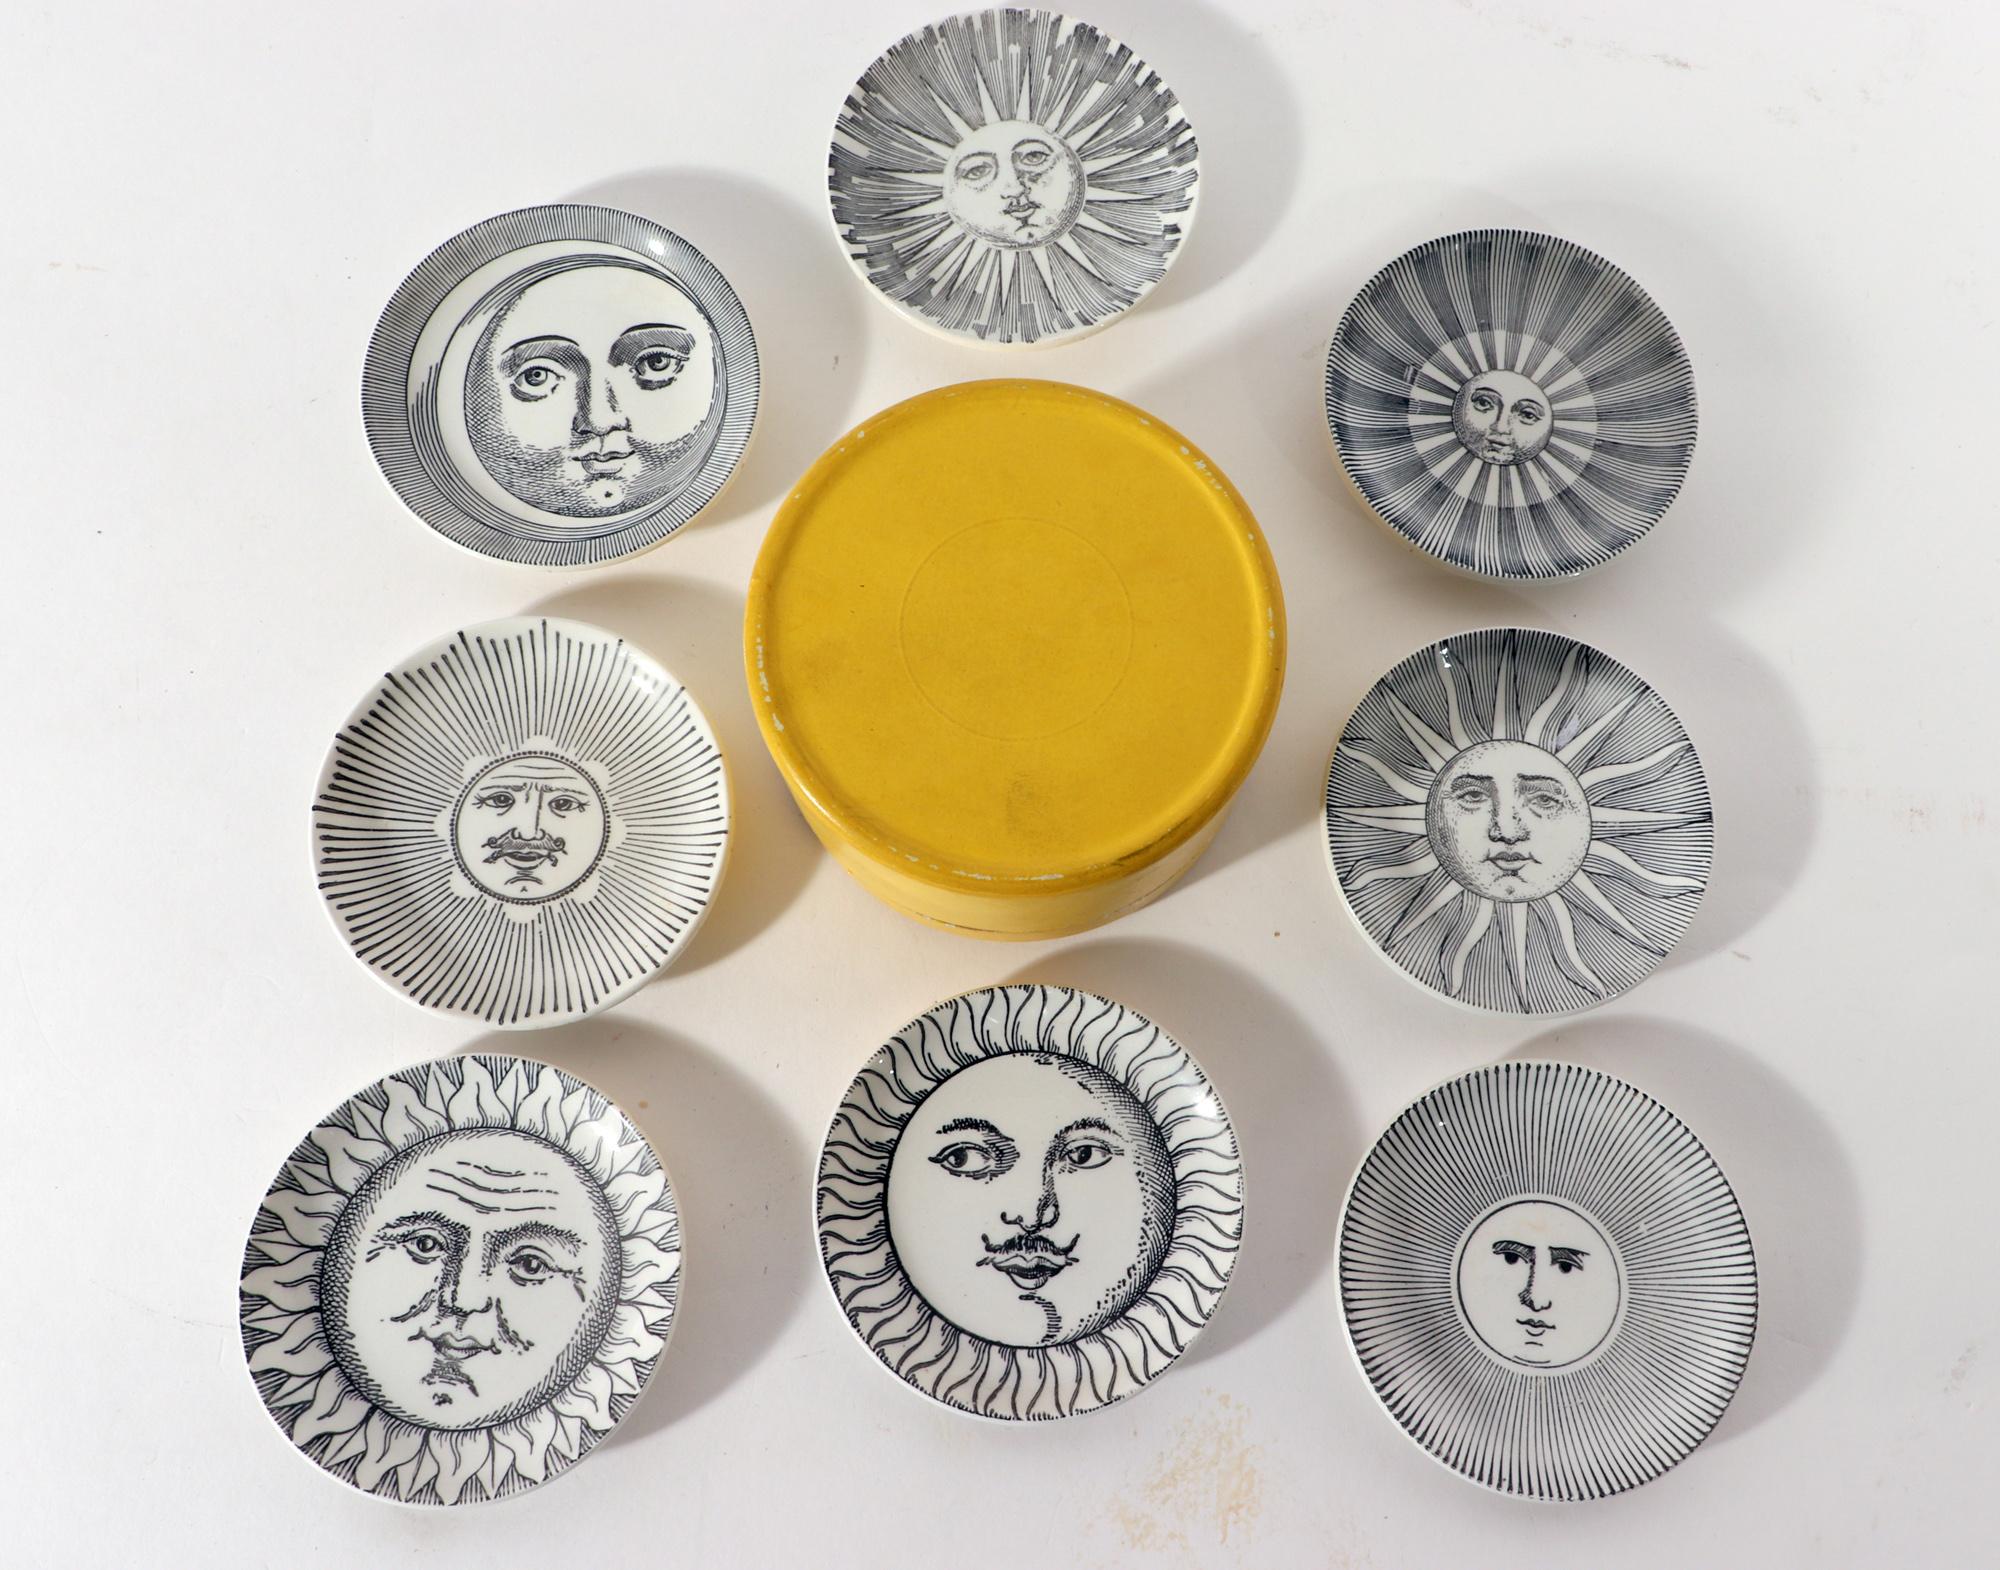 Piero Fornasetti Soli e Lune ceramic coasters with original yellow box,
1950s

The early Piero Fornasetti ceramic coasters are each decorated with a different image of the Sun or the Moon. These were designed to hold a cocktail snack such as